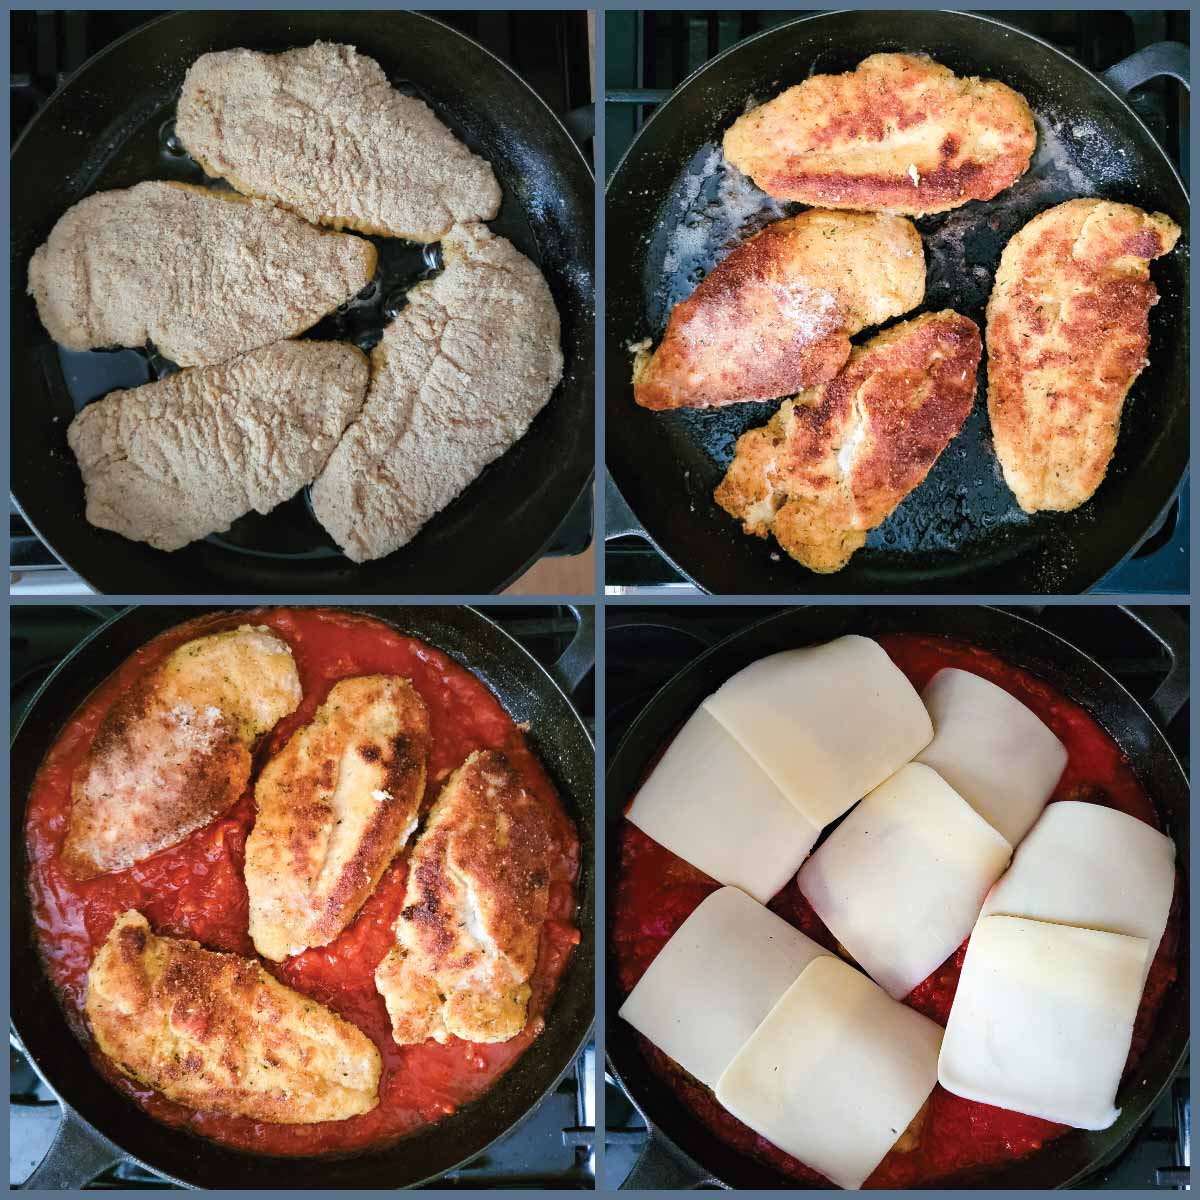 Steps for cooking the chicken - frying, flipping, adding sauce and adding cheese.